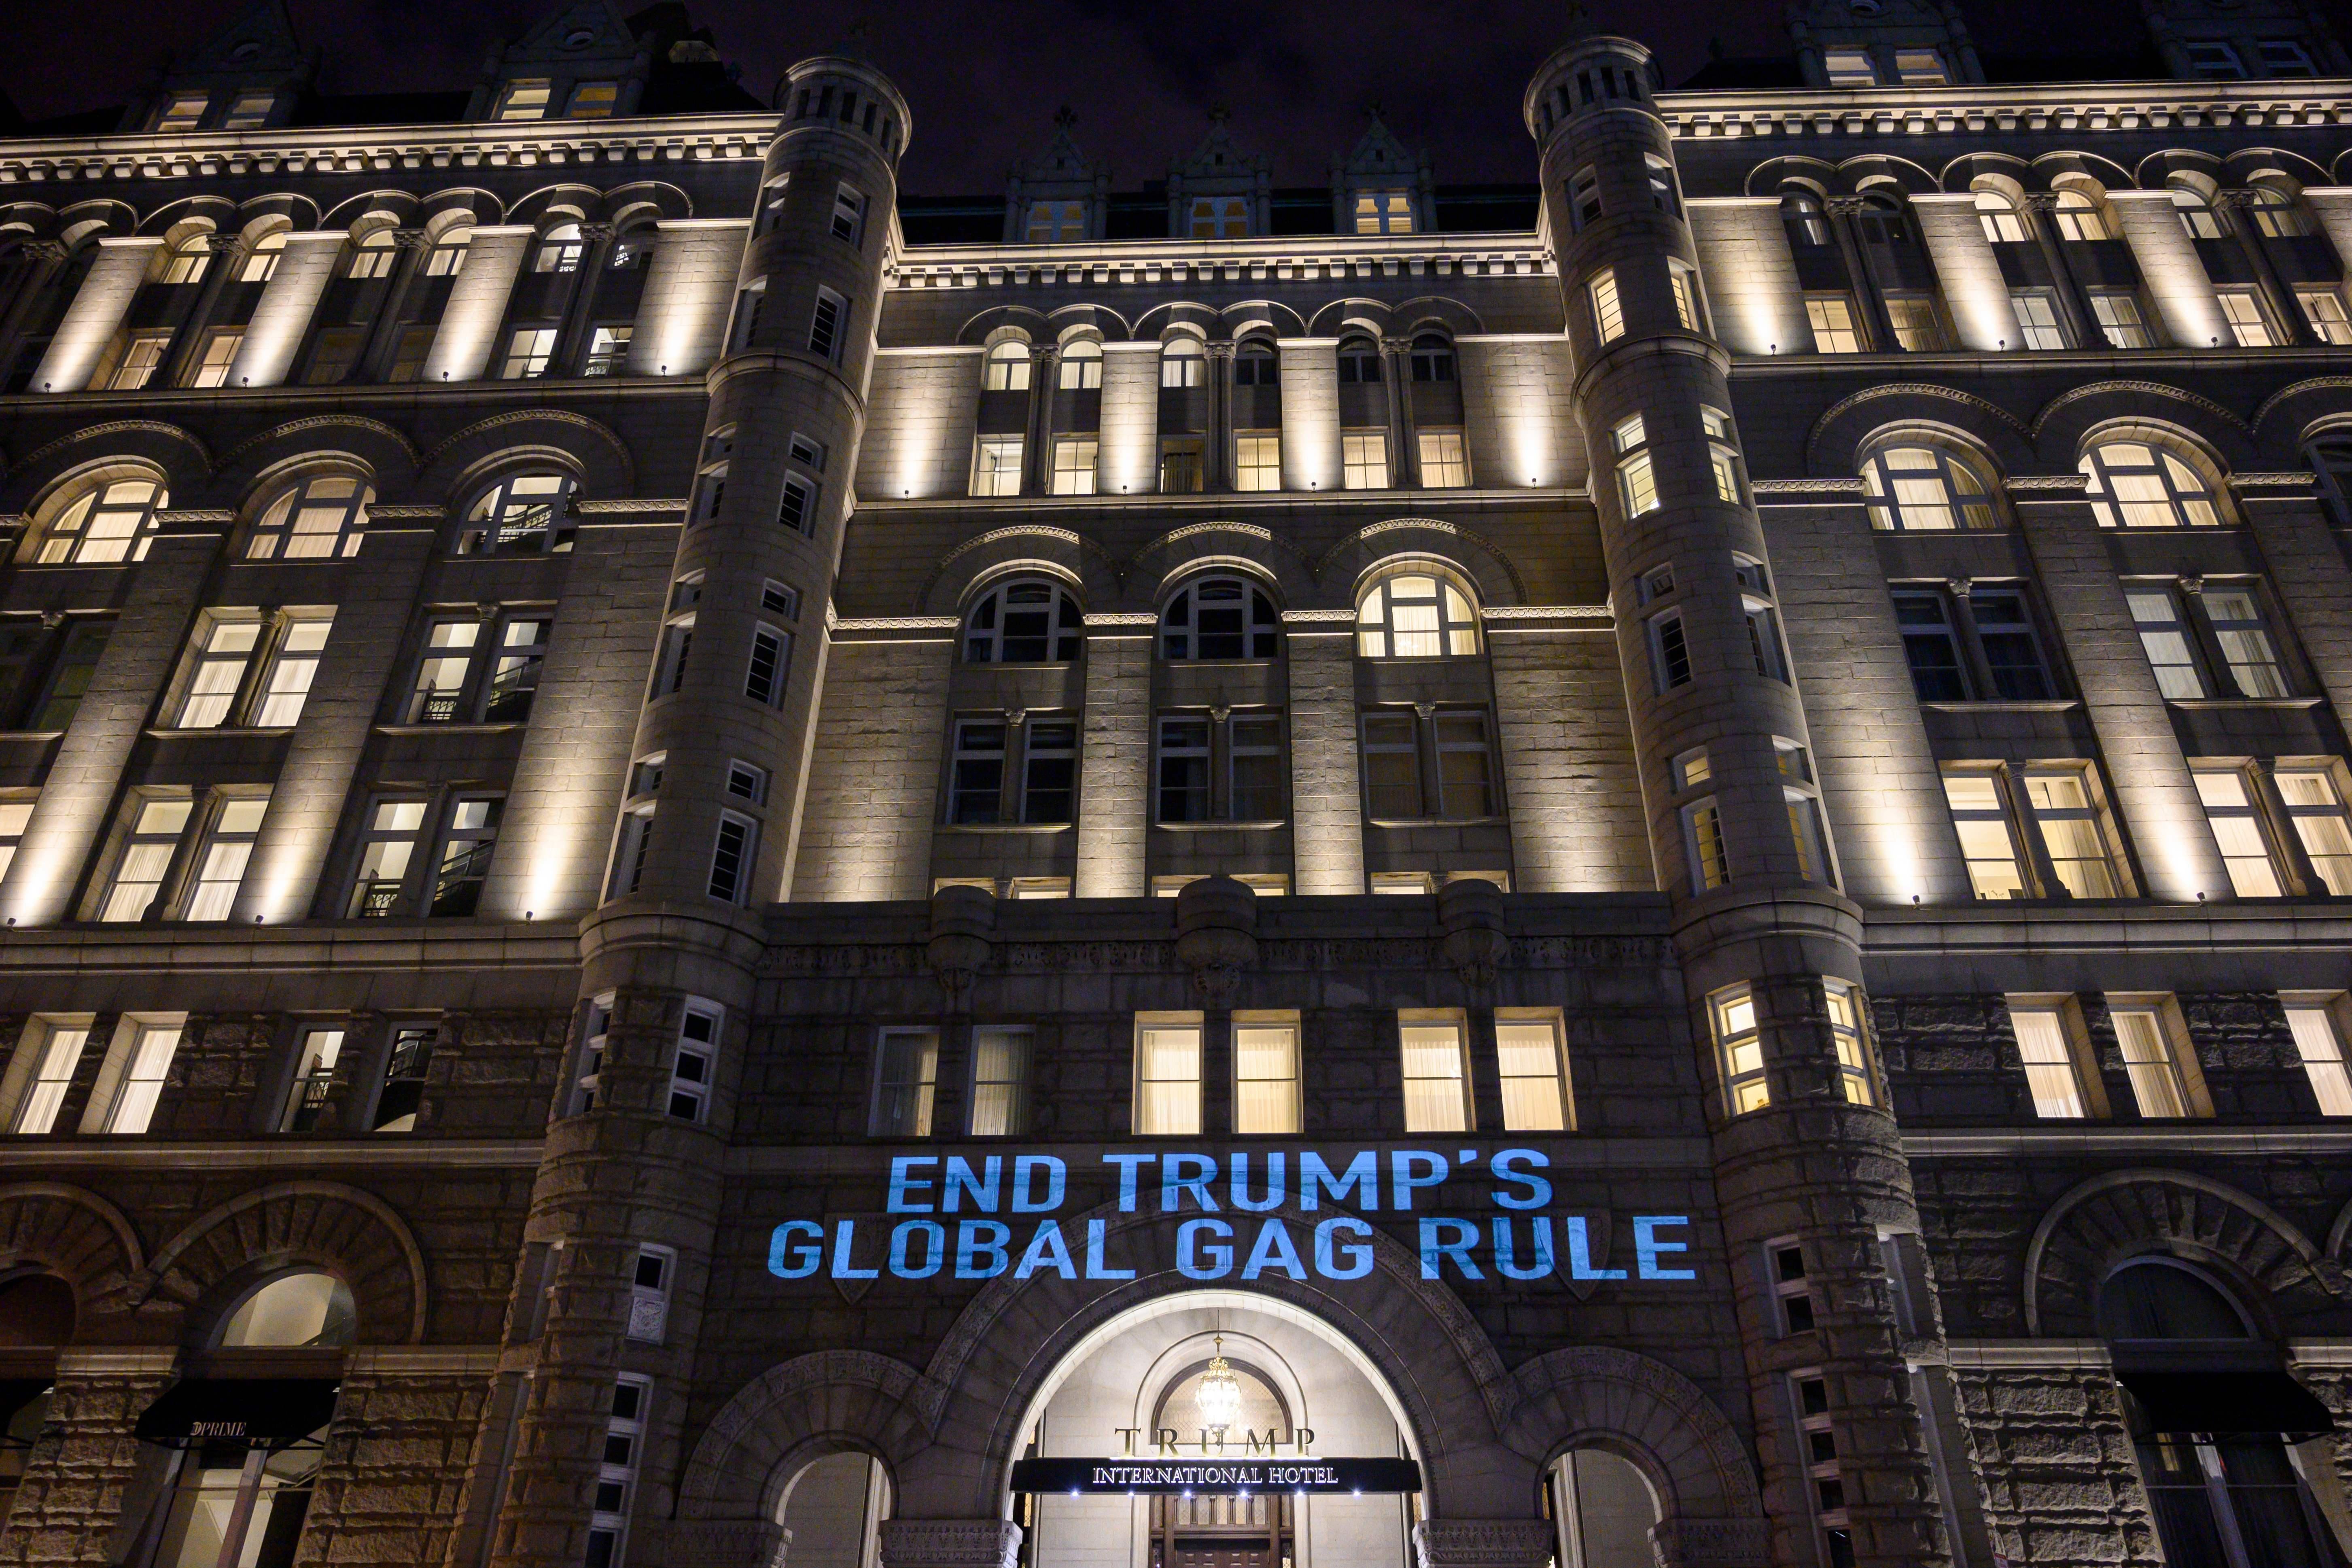 END TRUMP'S GLOBAL GAG RULE is projected in blue light on the front of dramatic-looking hotel at night.